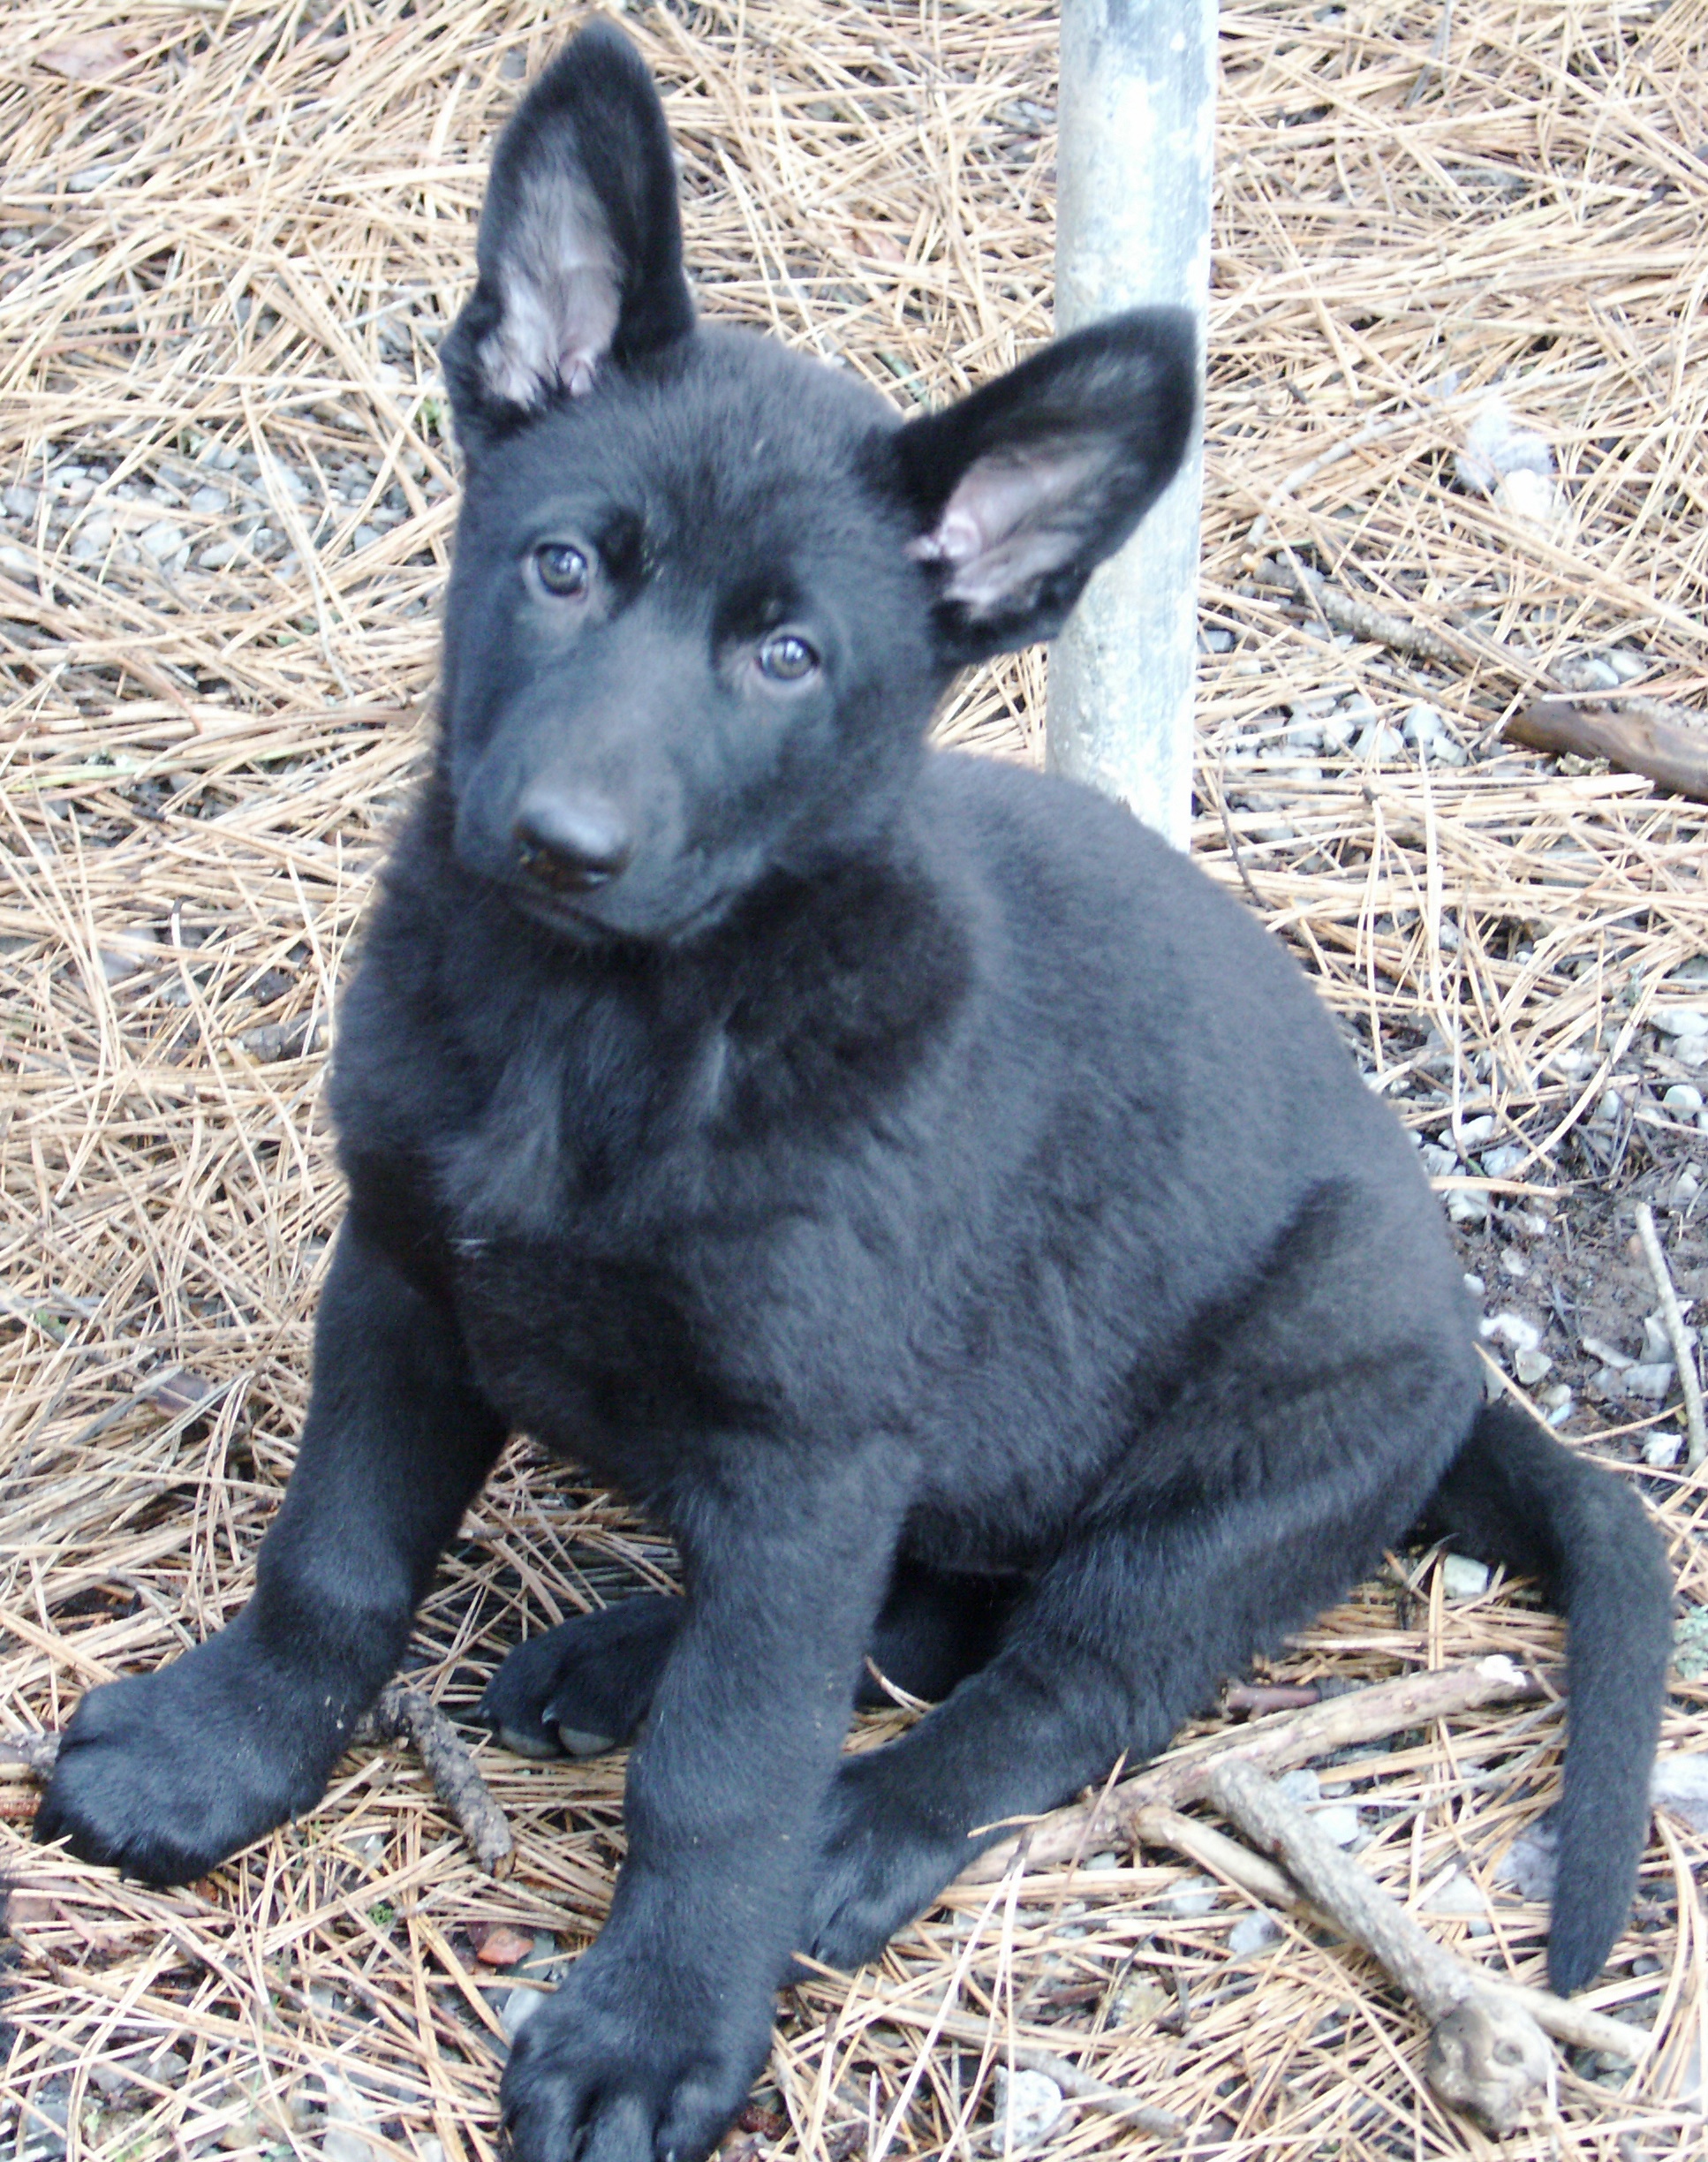 GOT PROTECTION? Rare Solid Black  GOT PROTECTION? Rare Solid Black AKC German Shepherd Puppies German/Czech bloodlines. $975 Trade or payments 208-664-3819 (landline) susan.elkmountainranch @gmail.com